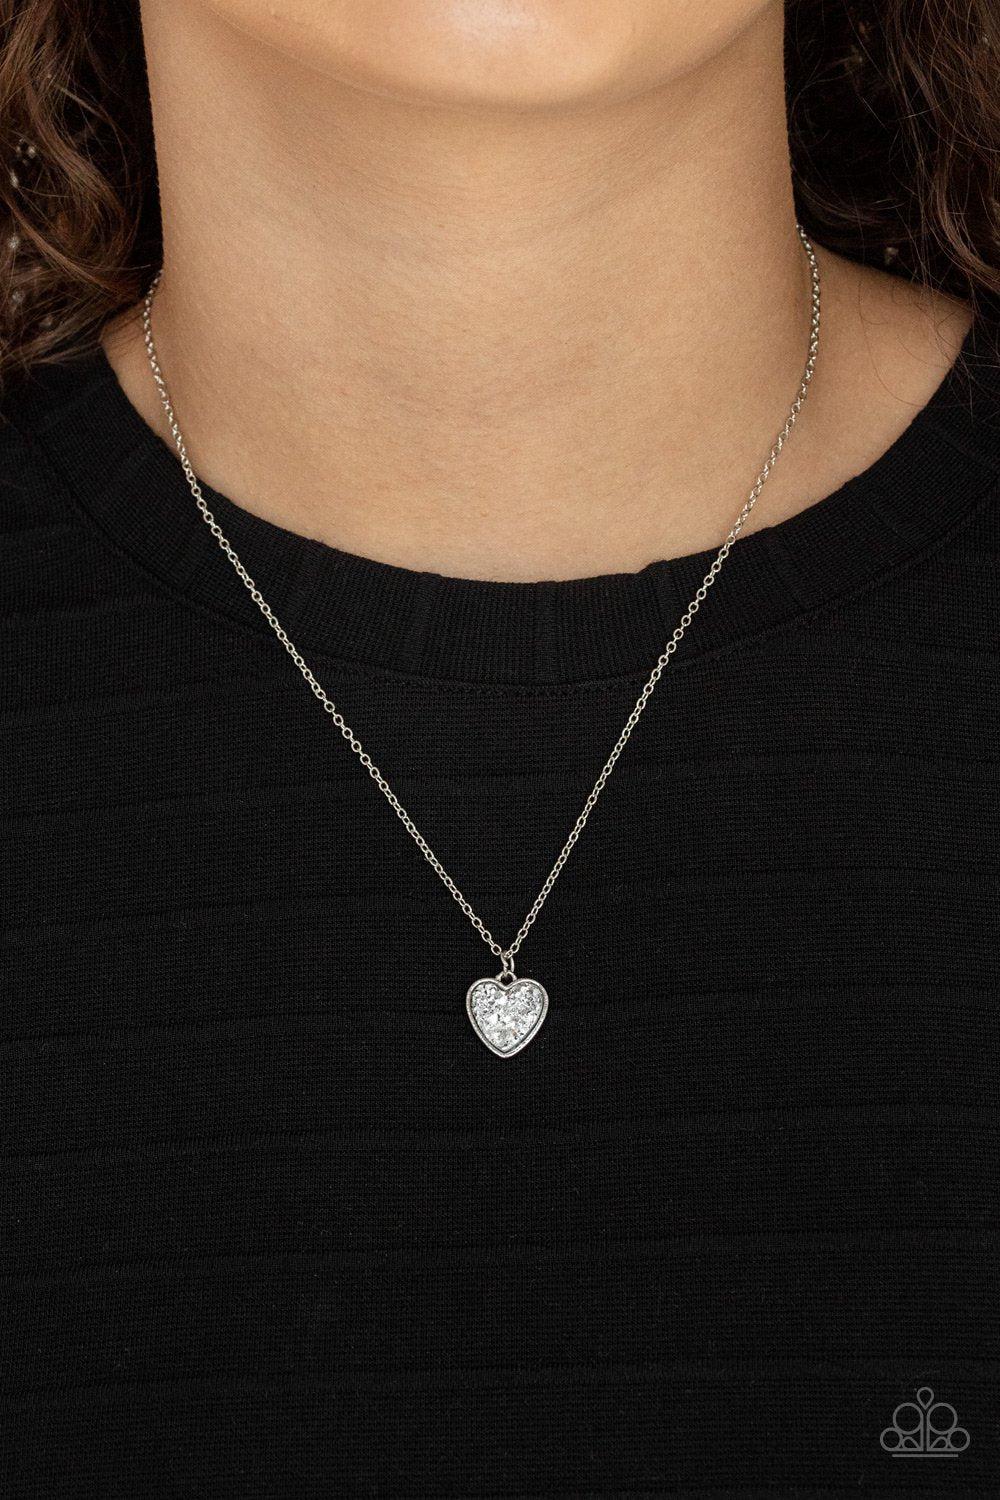 Pitter-Patter, Goes My Heart Silver Heart Necklace - Paparazzi Accessories- model - CarasShop.com - $5 Jewelry by Cara Jewels